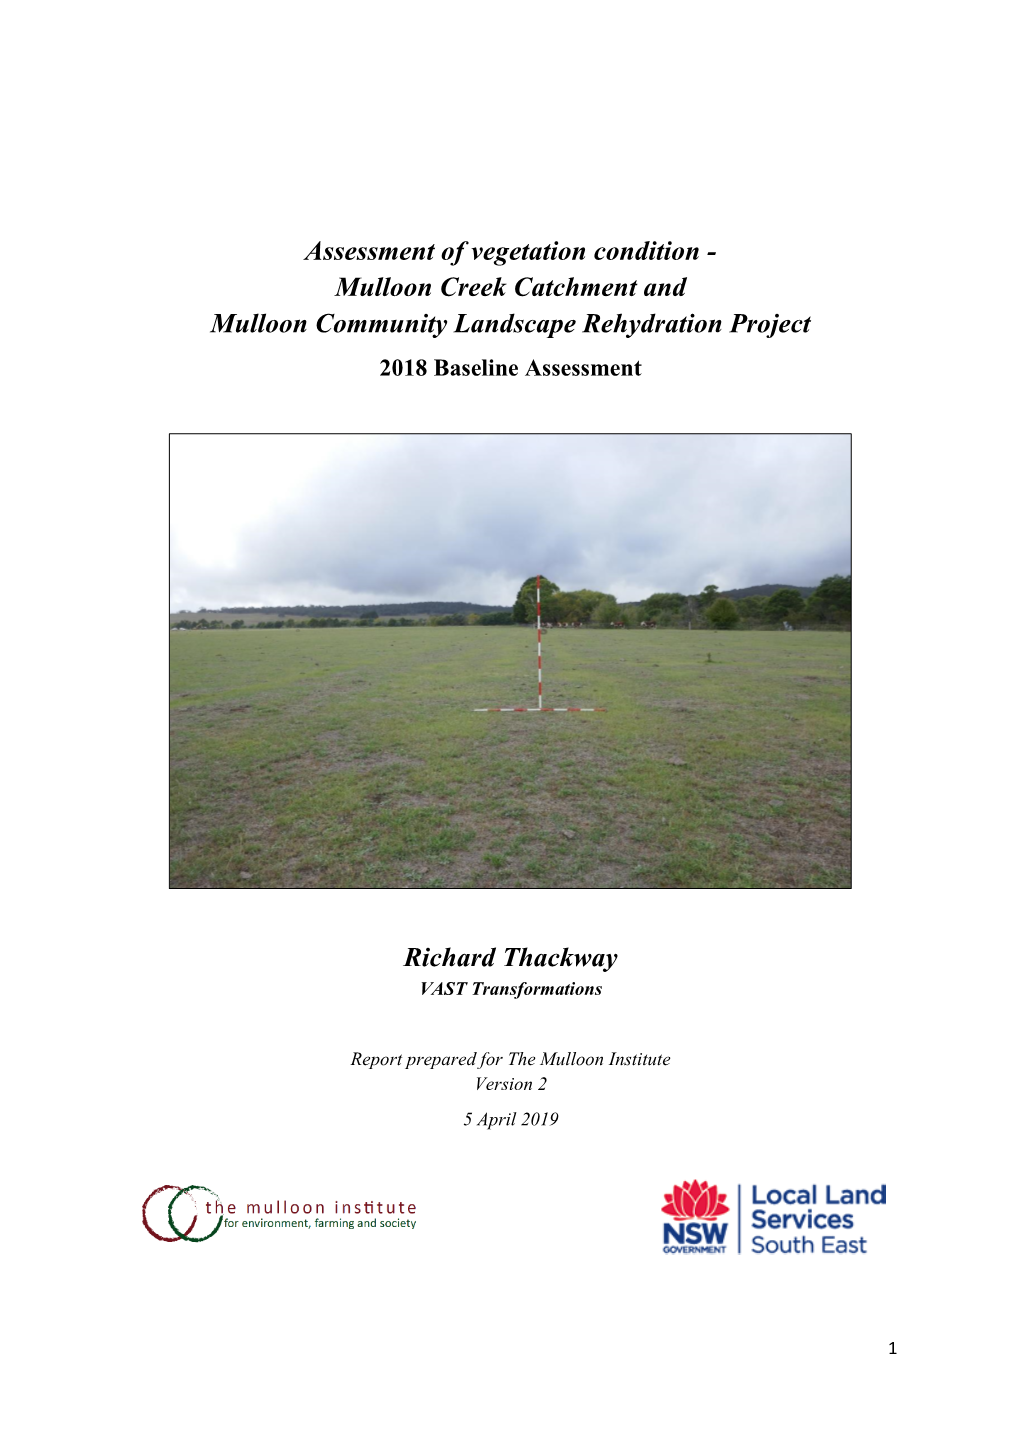 Assessment of Vegetation Condition - Mulloon Creek Catchment and Mulloon Community Landscape Rehydration Project 2018 Baseline Assessment